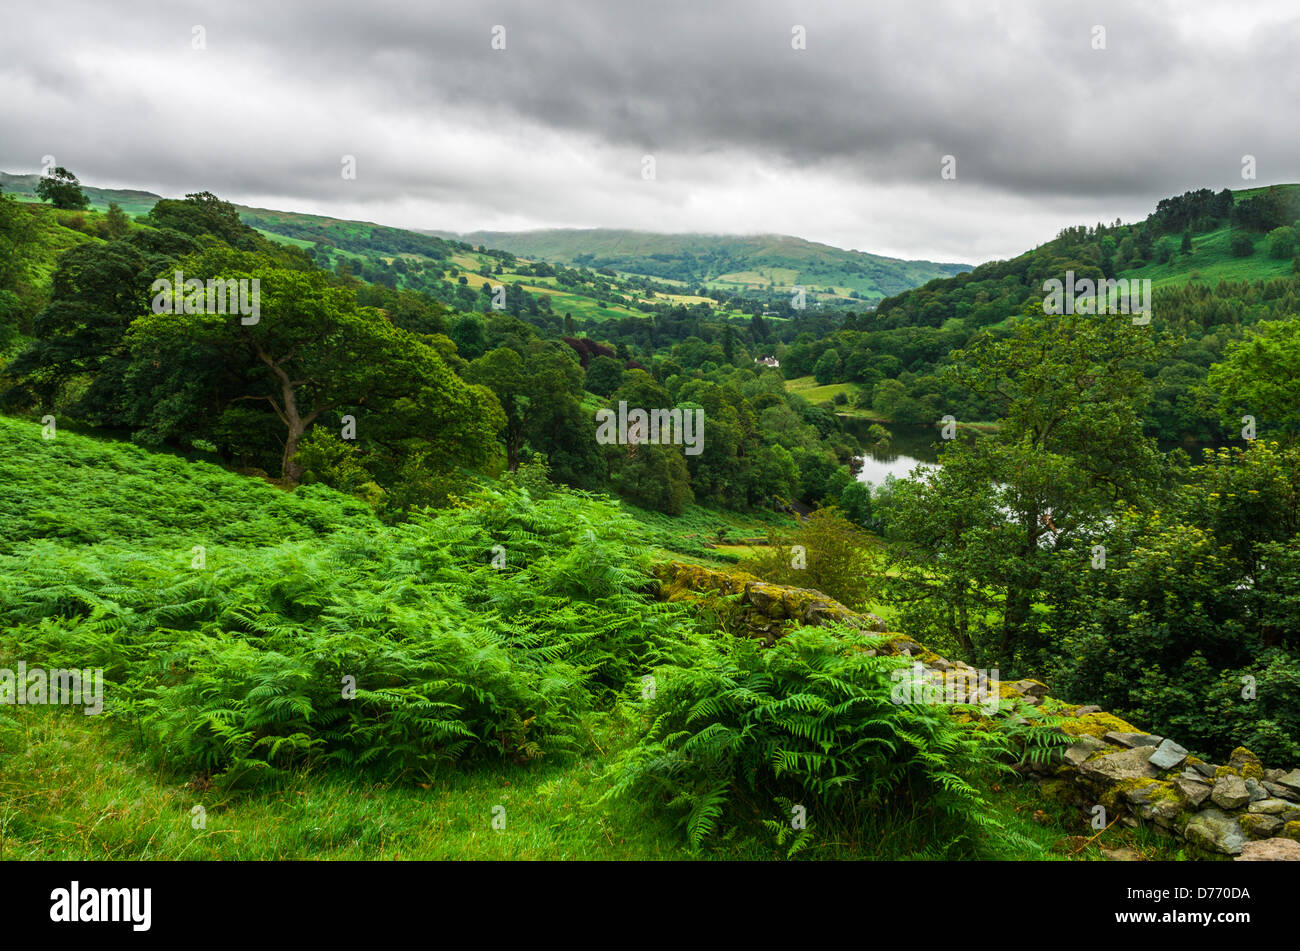 View over the Lake District landscape and Rydal Water, Cumbria, England. Stock Photo